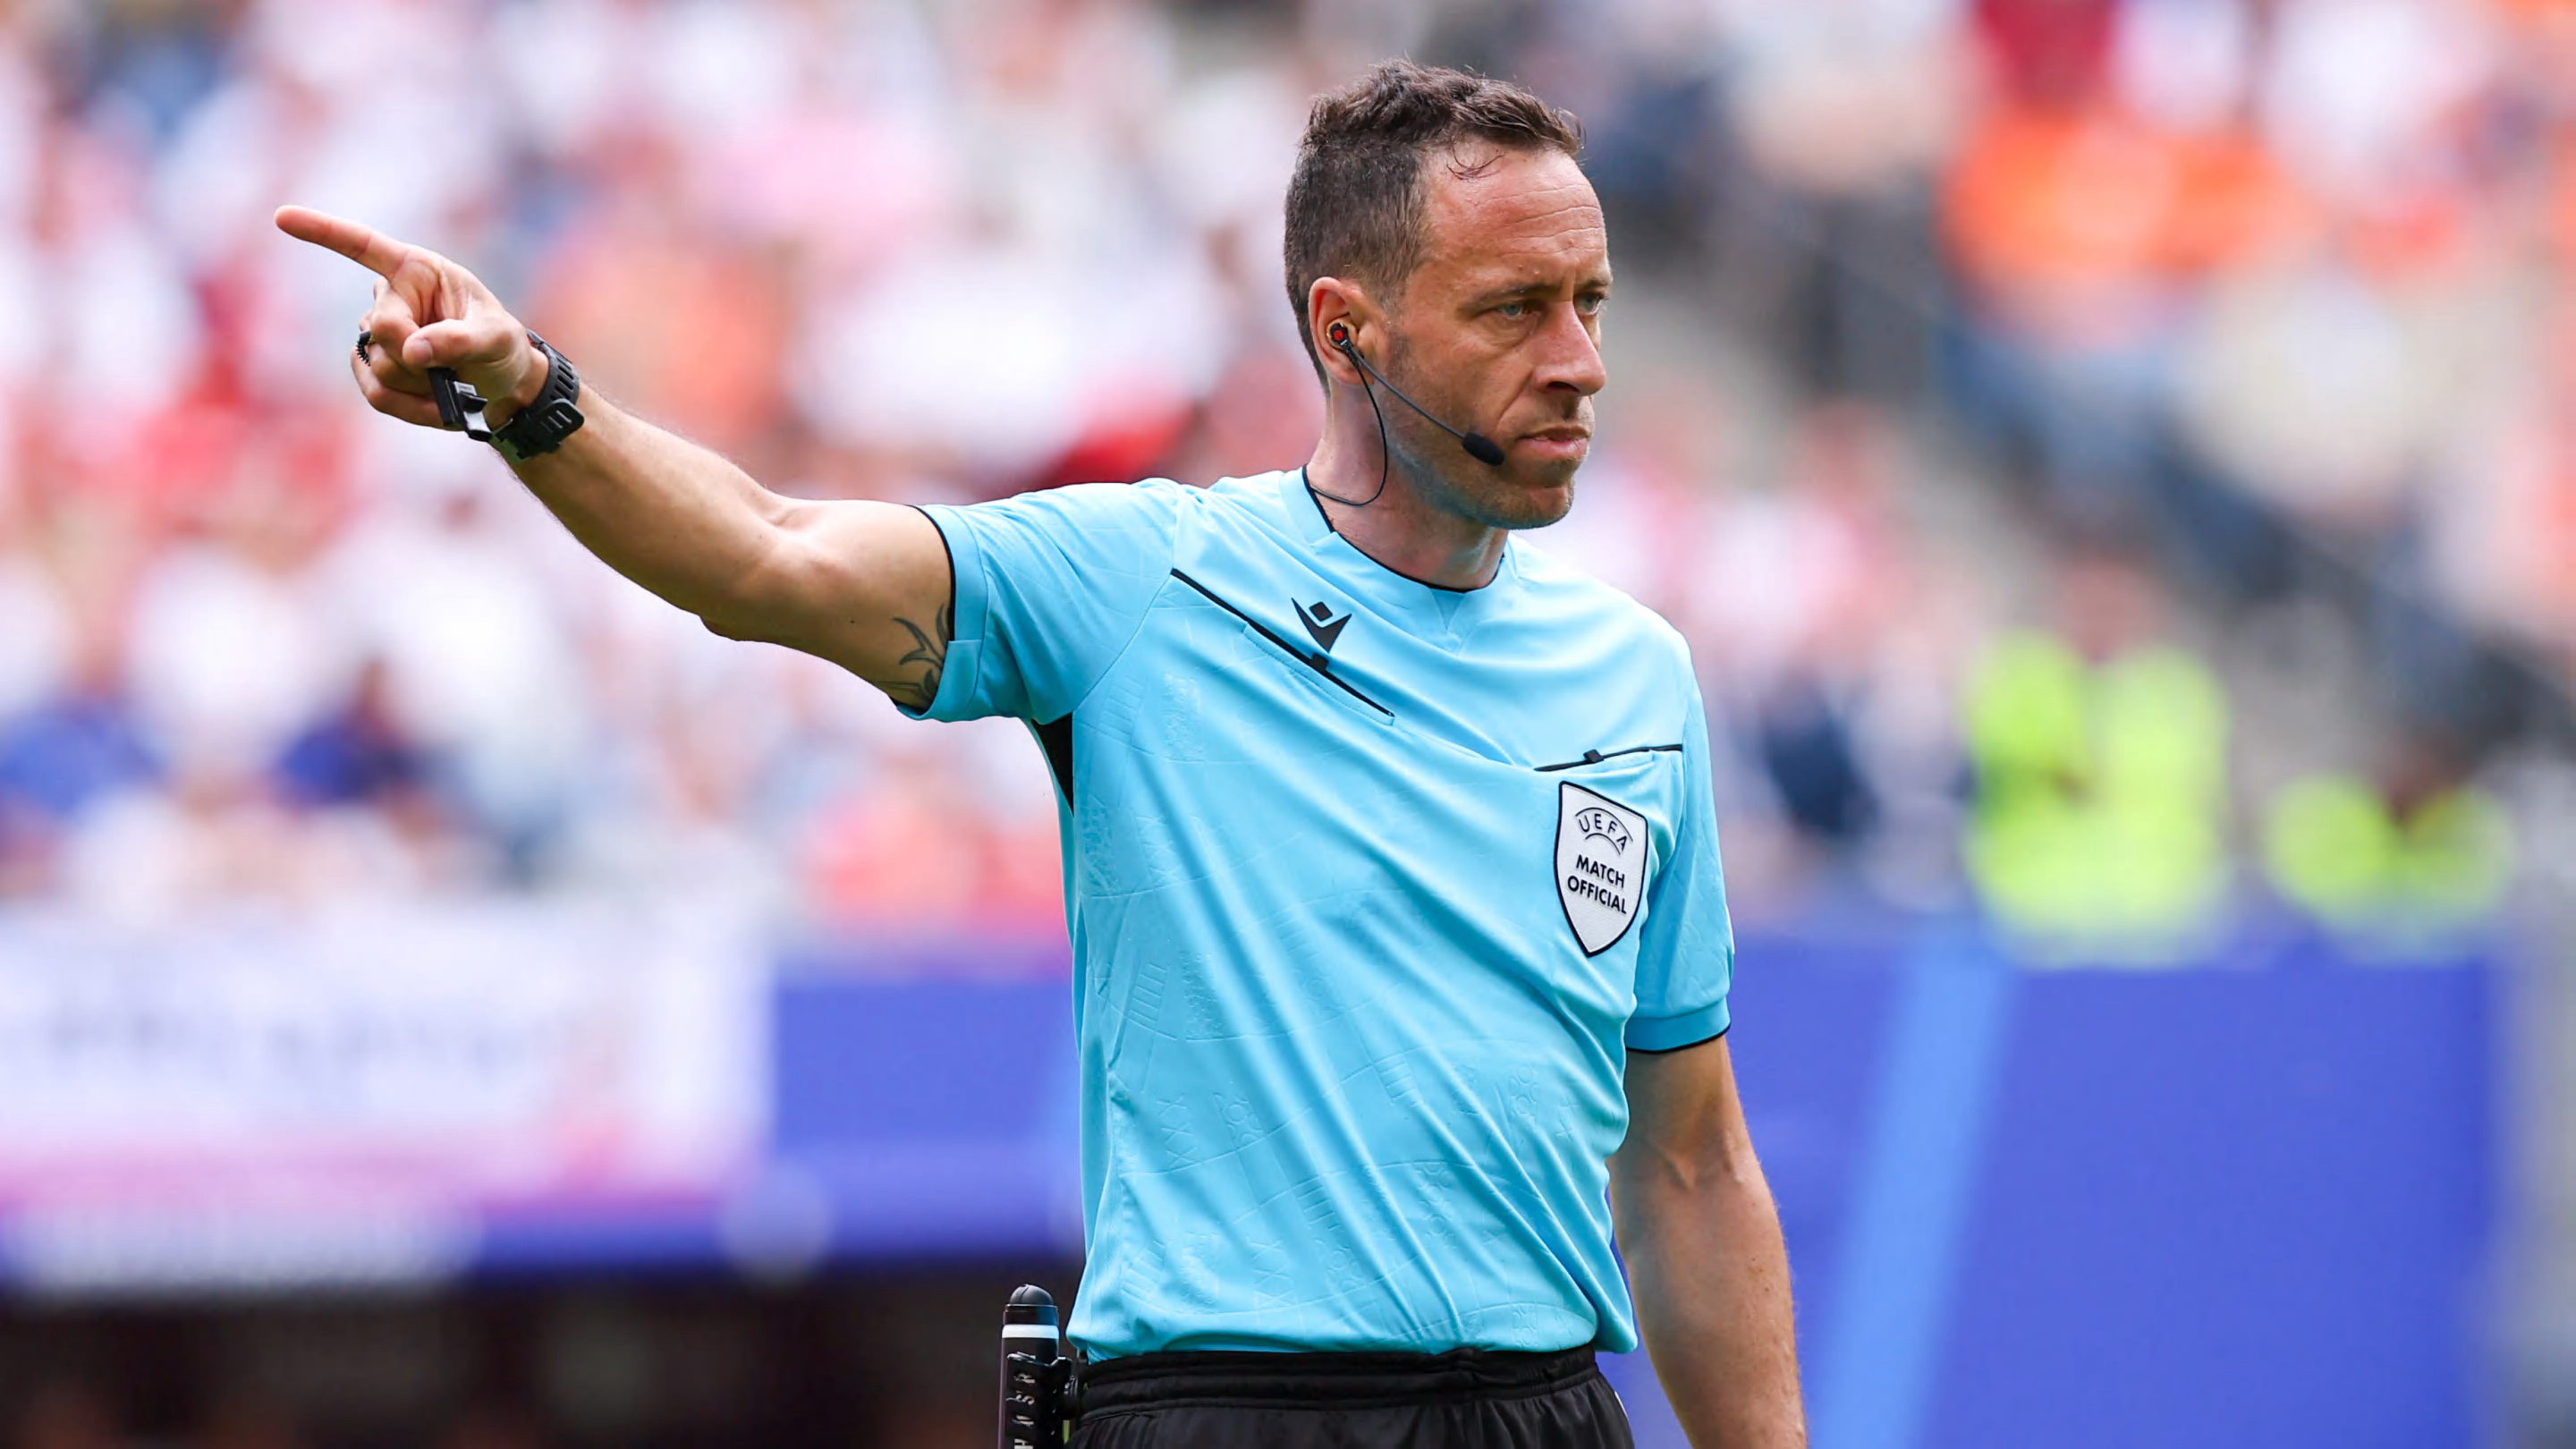 Who is the referee for Denmark vs England?